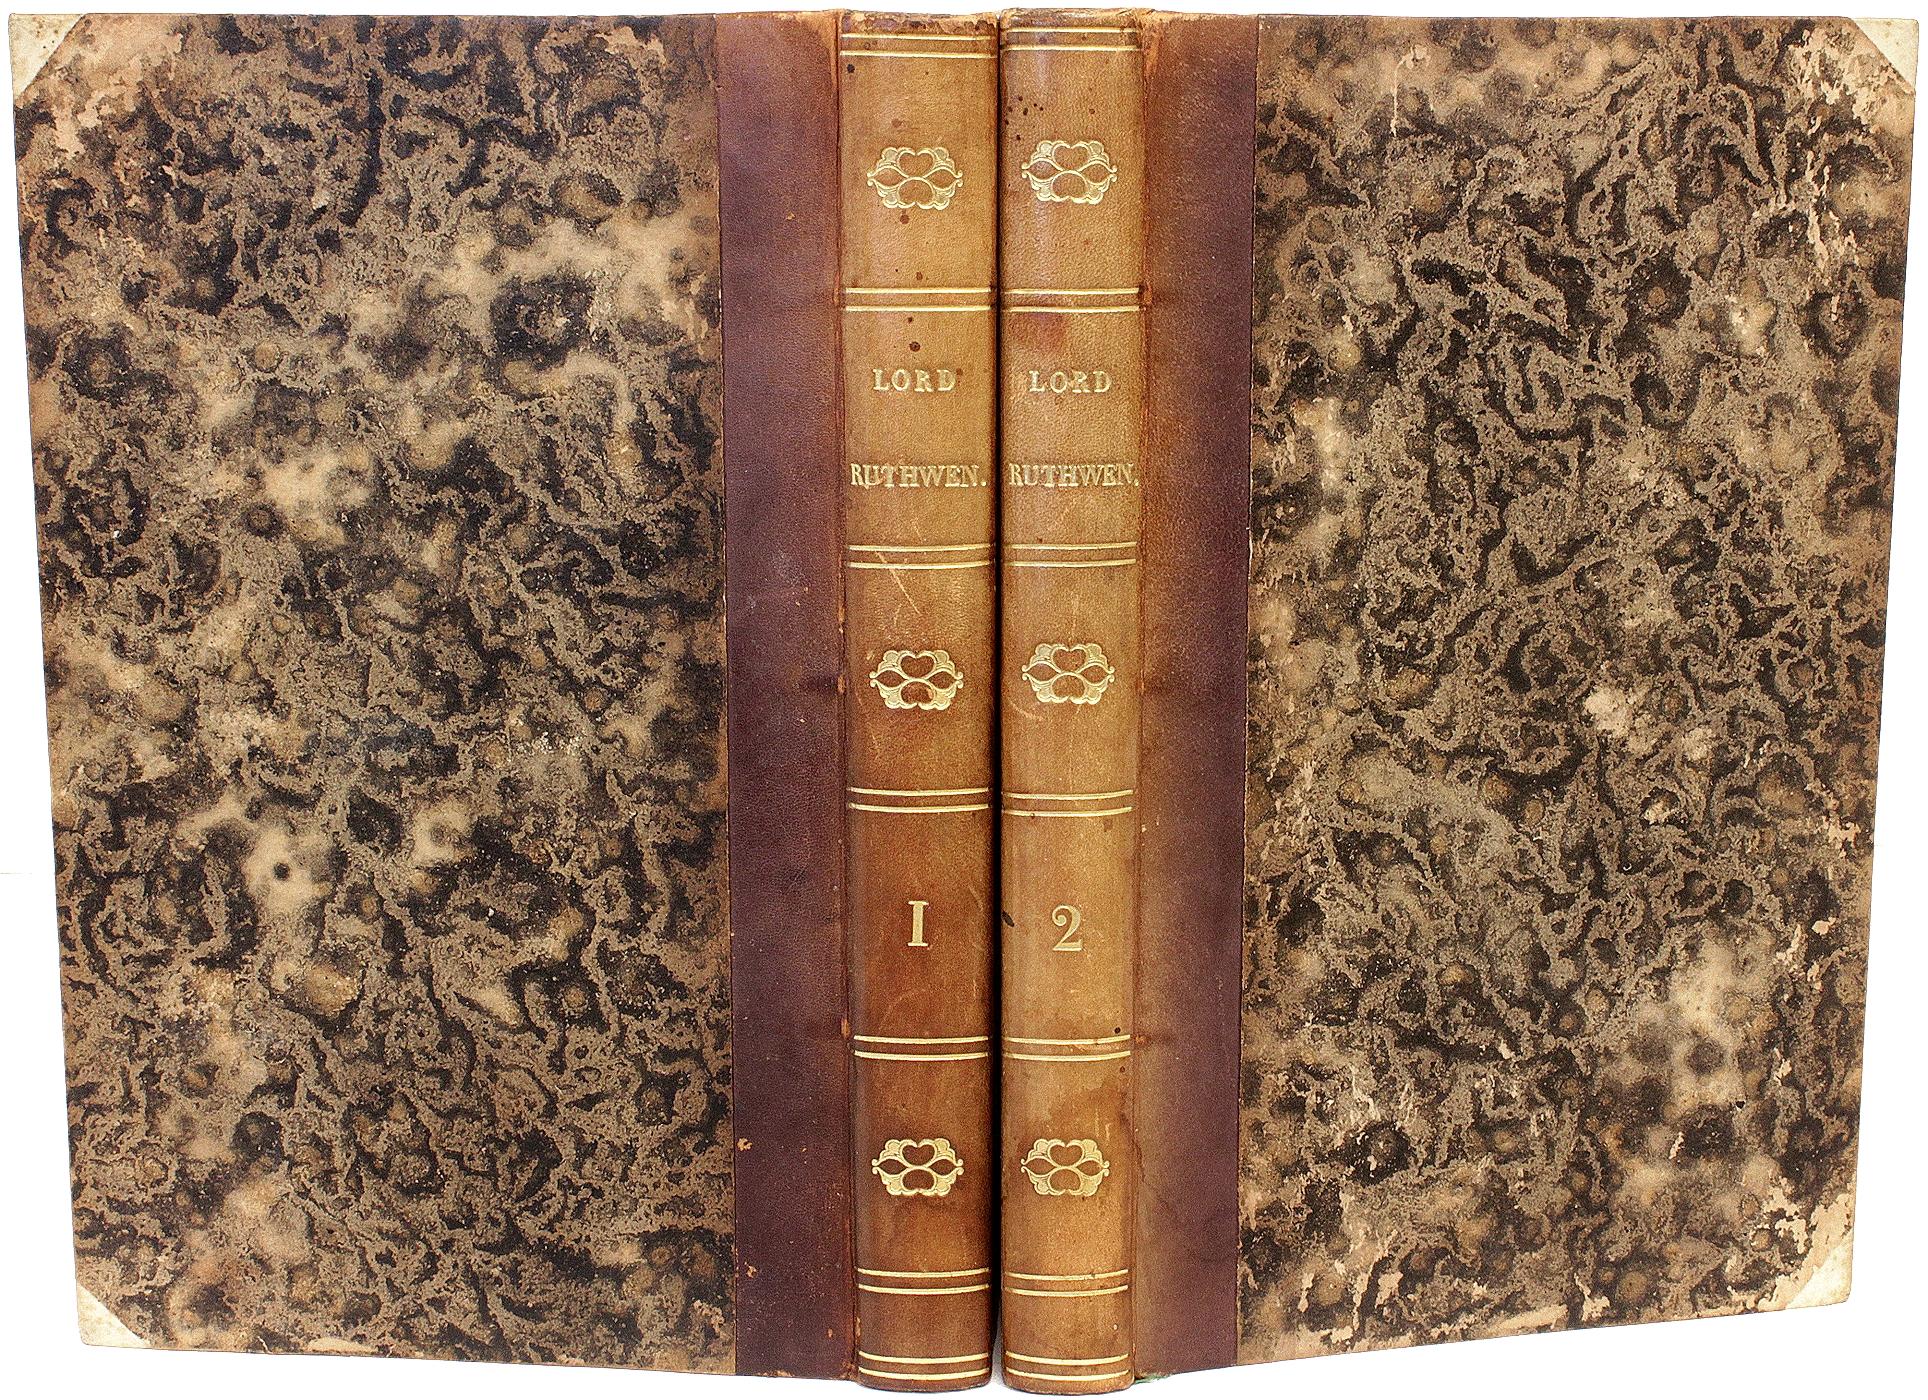 Early 19th Century Cyprien Berard - Lord Ruthwen, ou Les Vampires - 1820 - FIRST FRENCH EDITION For Sale